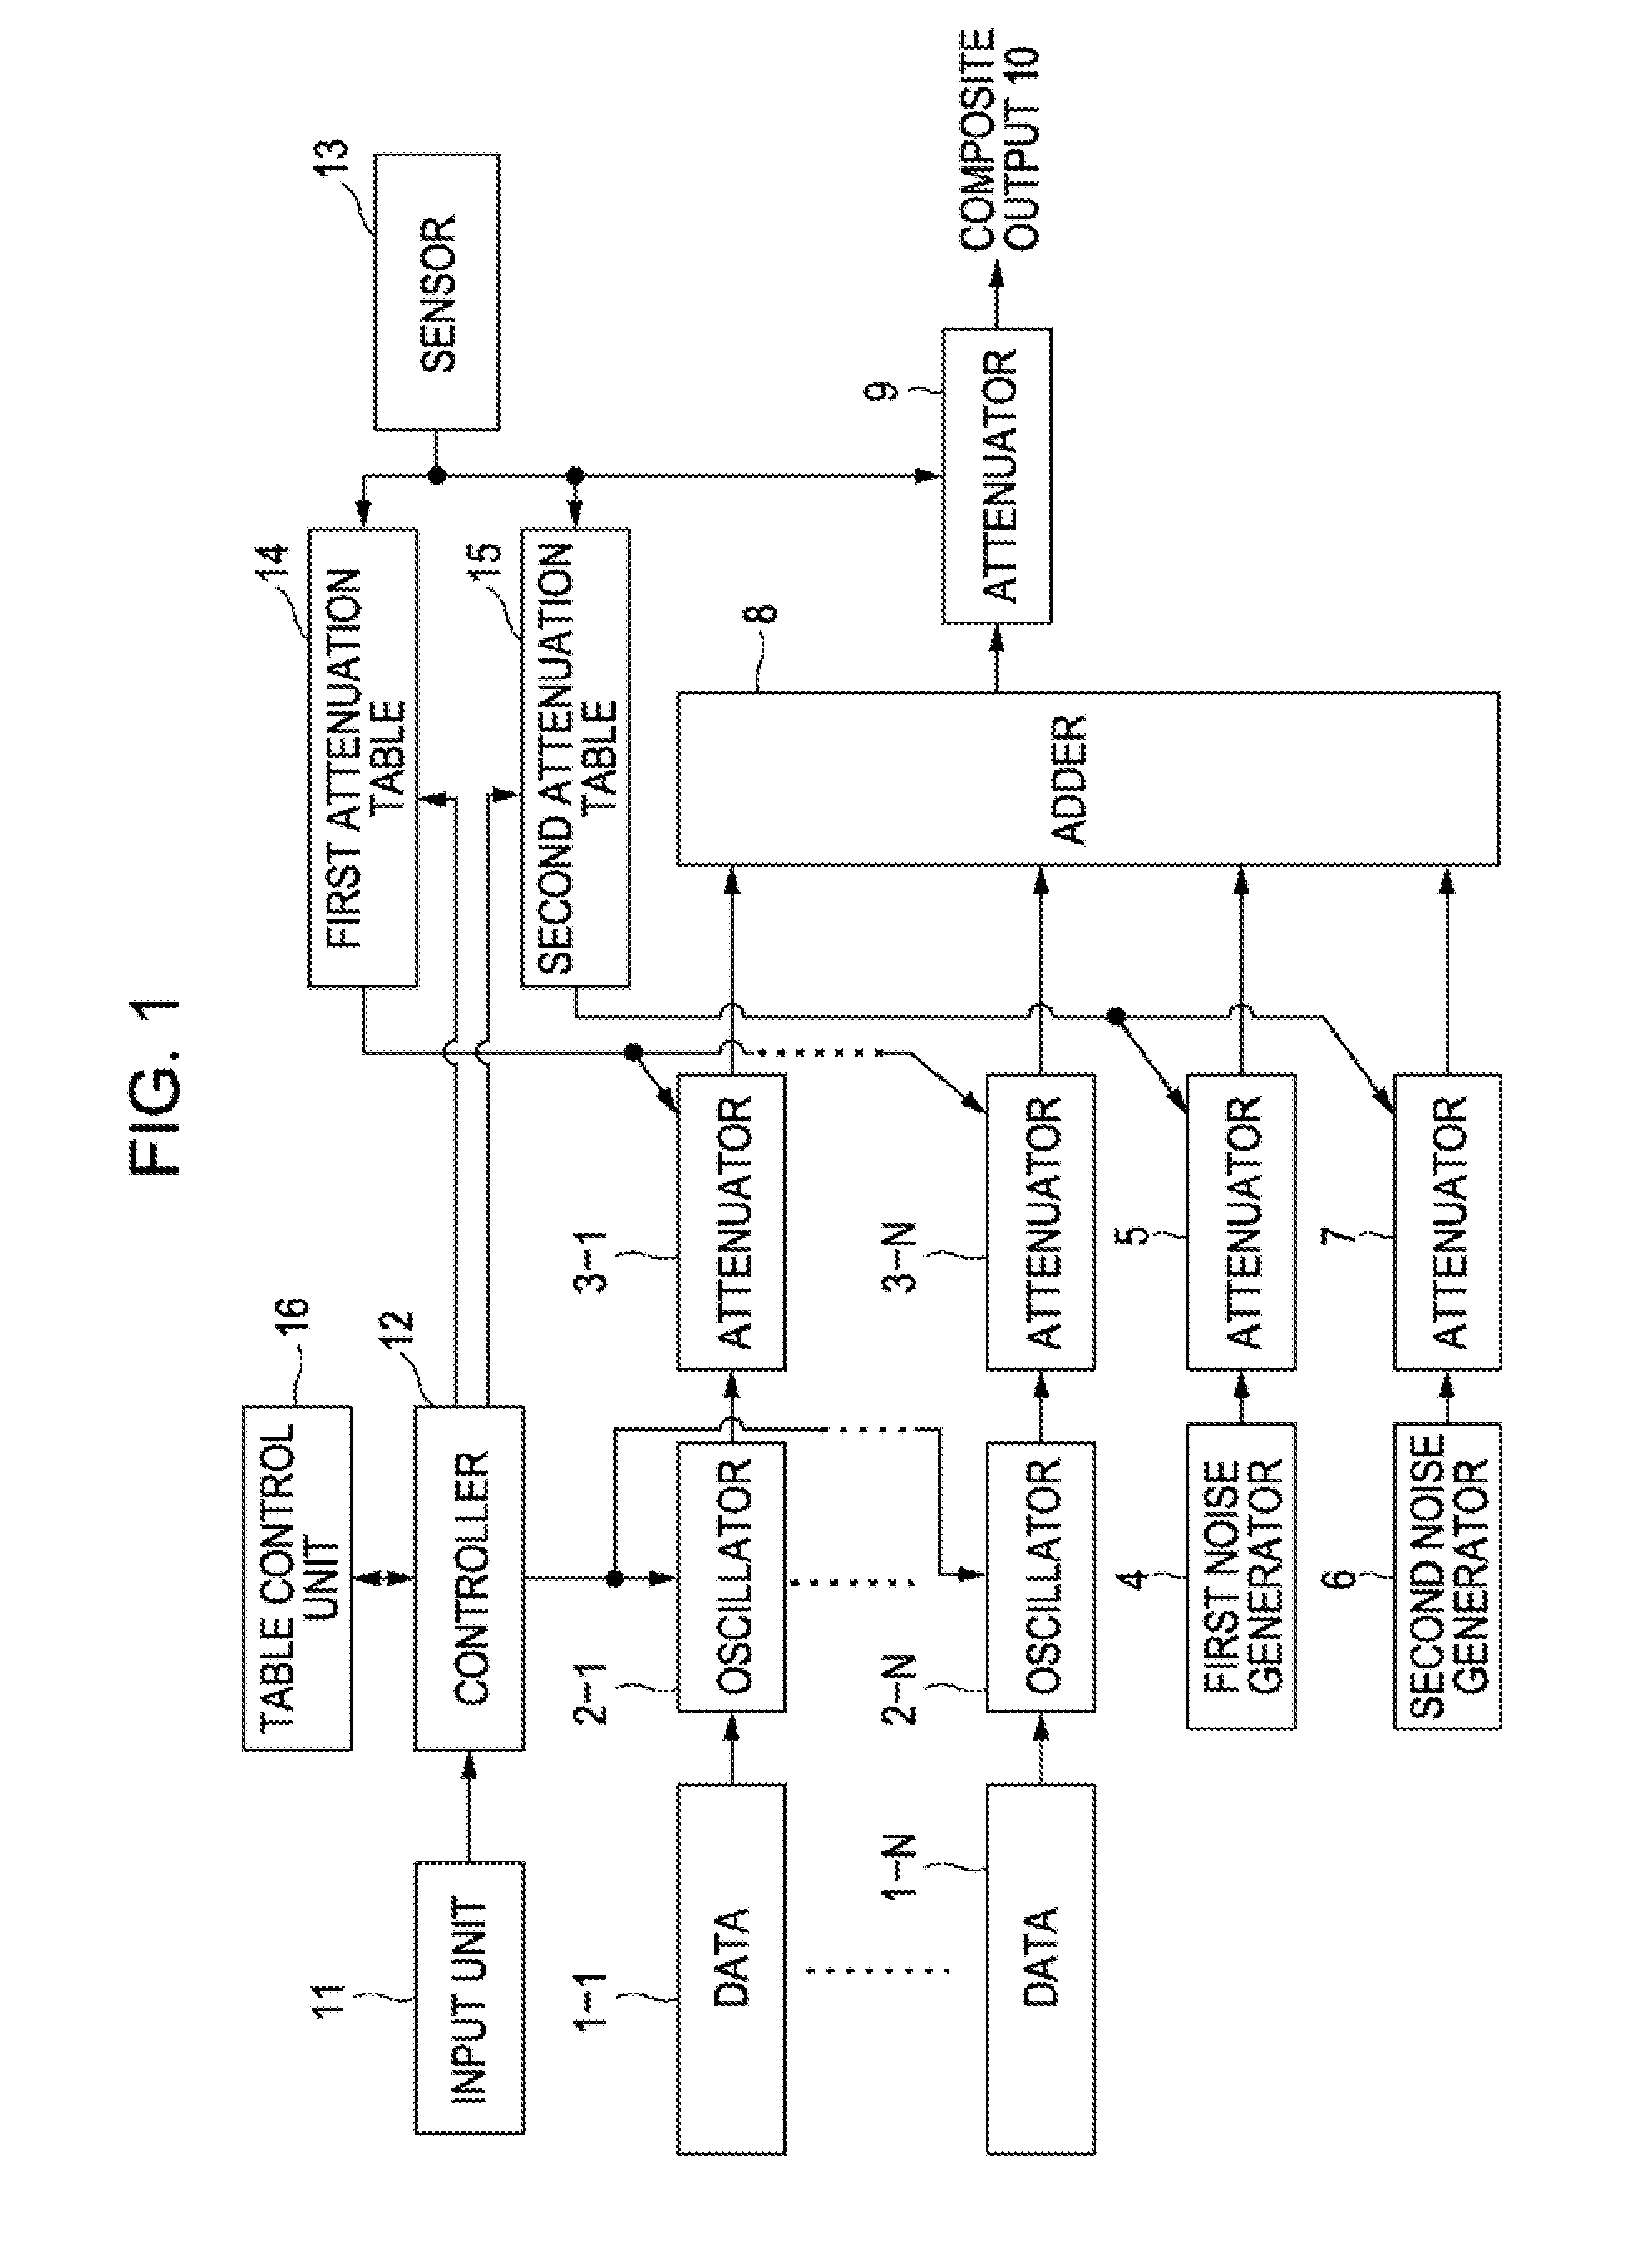 Piano sound source apparatus, method and program for piano sound synthesis